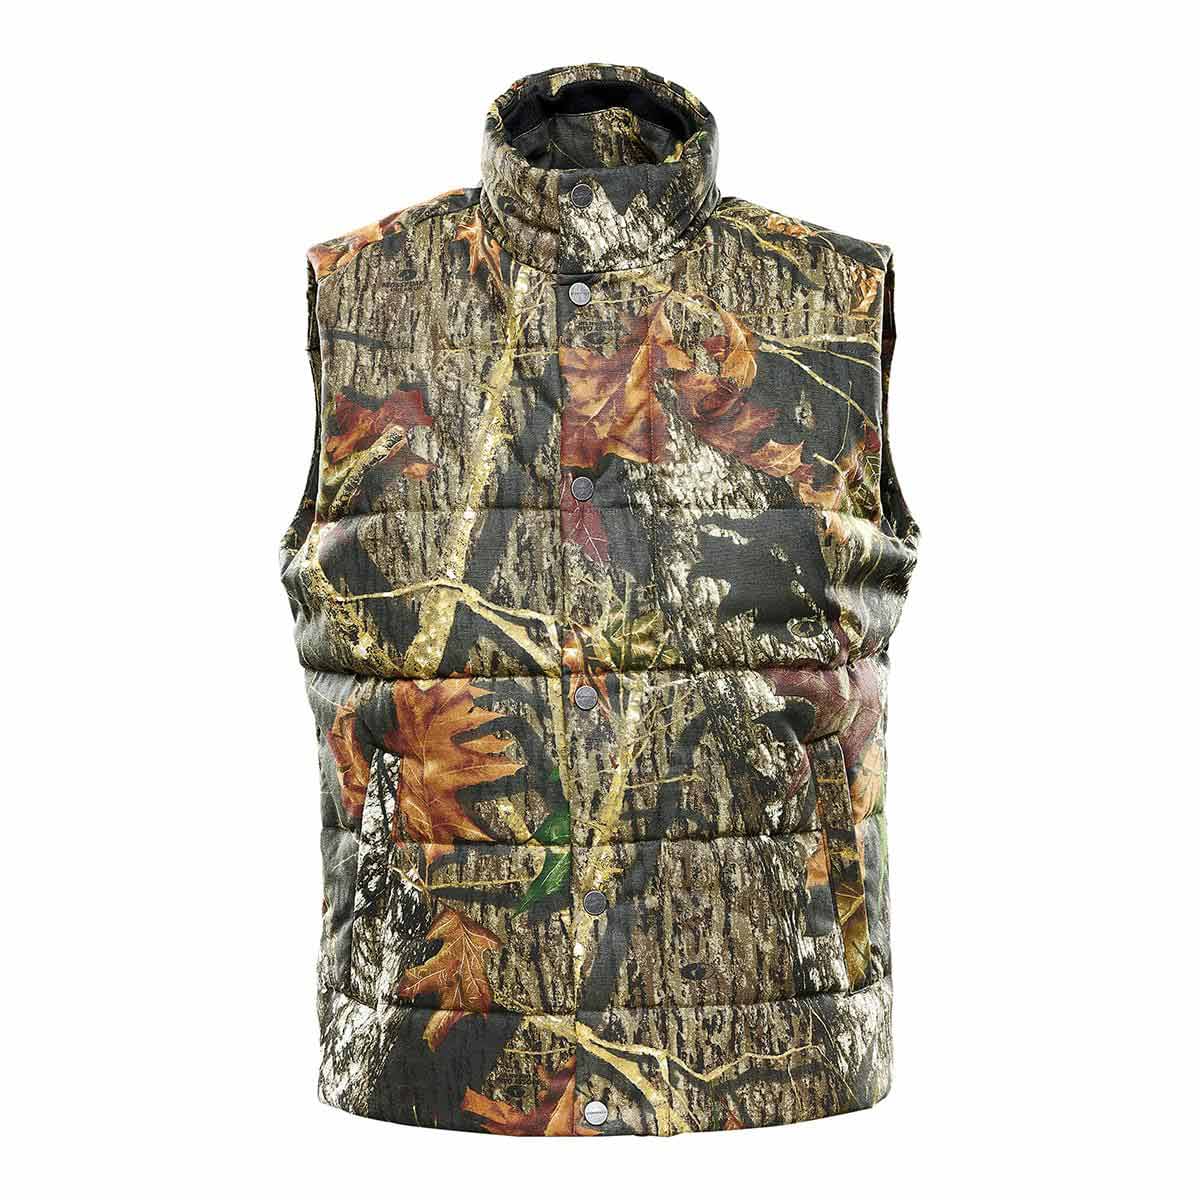  Dark Lightning Camo Breathable Insulated Chest